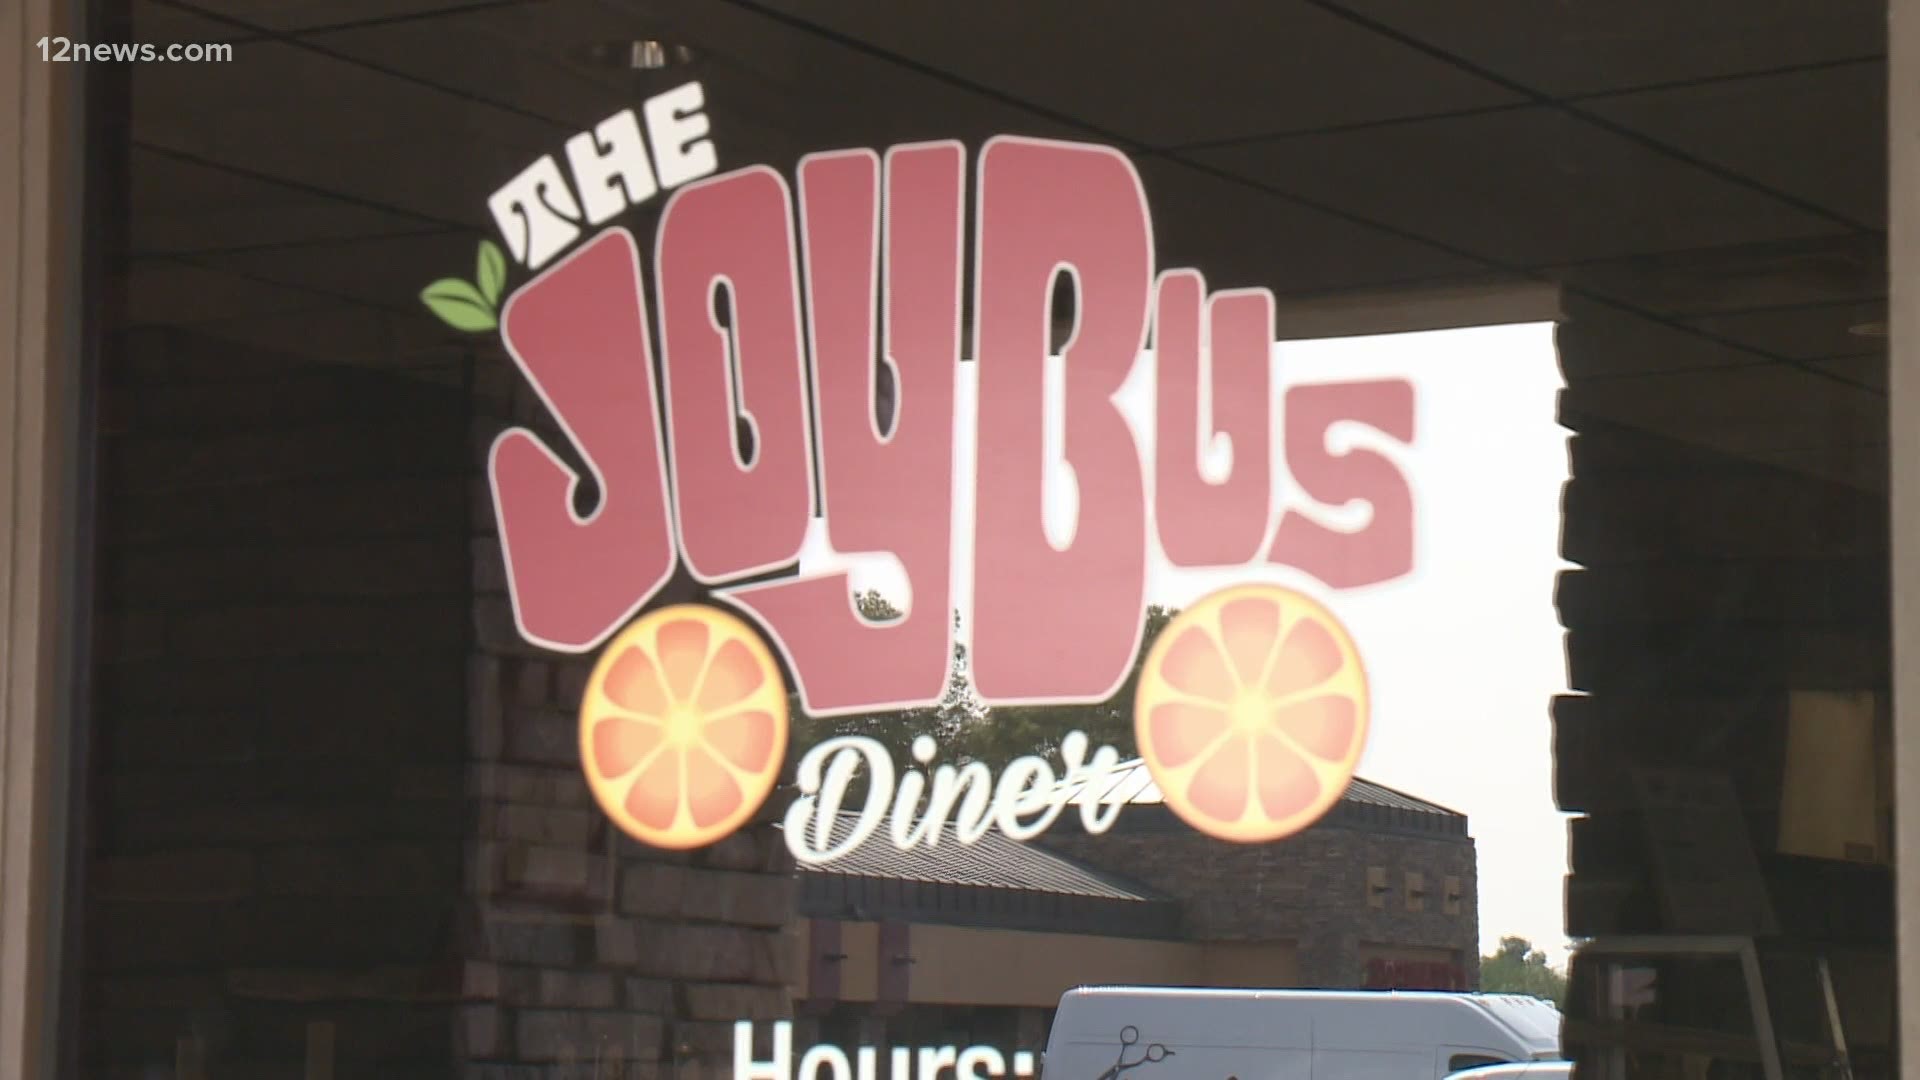 A Phoenix restaurant forced to close its doors during the COVID-19 pandemic is finding a way to operate in an extraordinary way by giving meals to cancer patients.